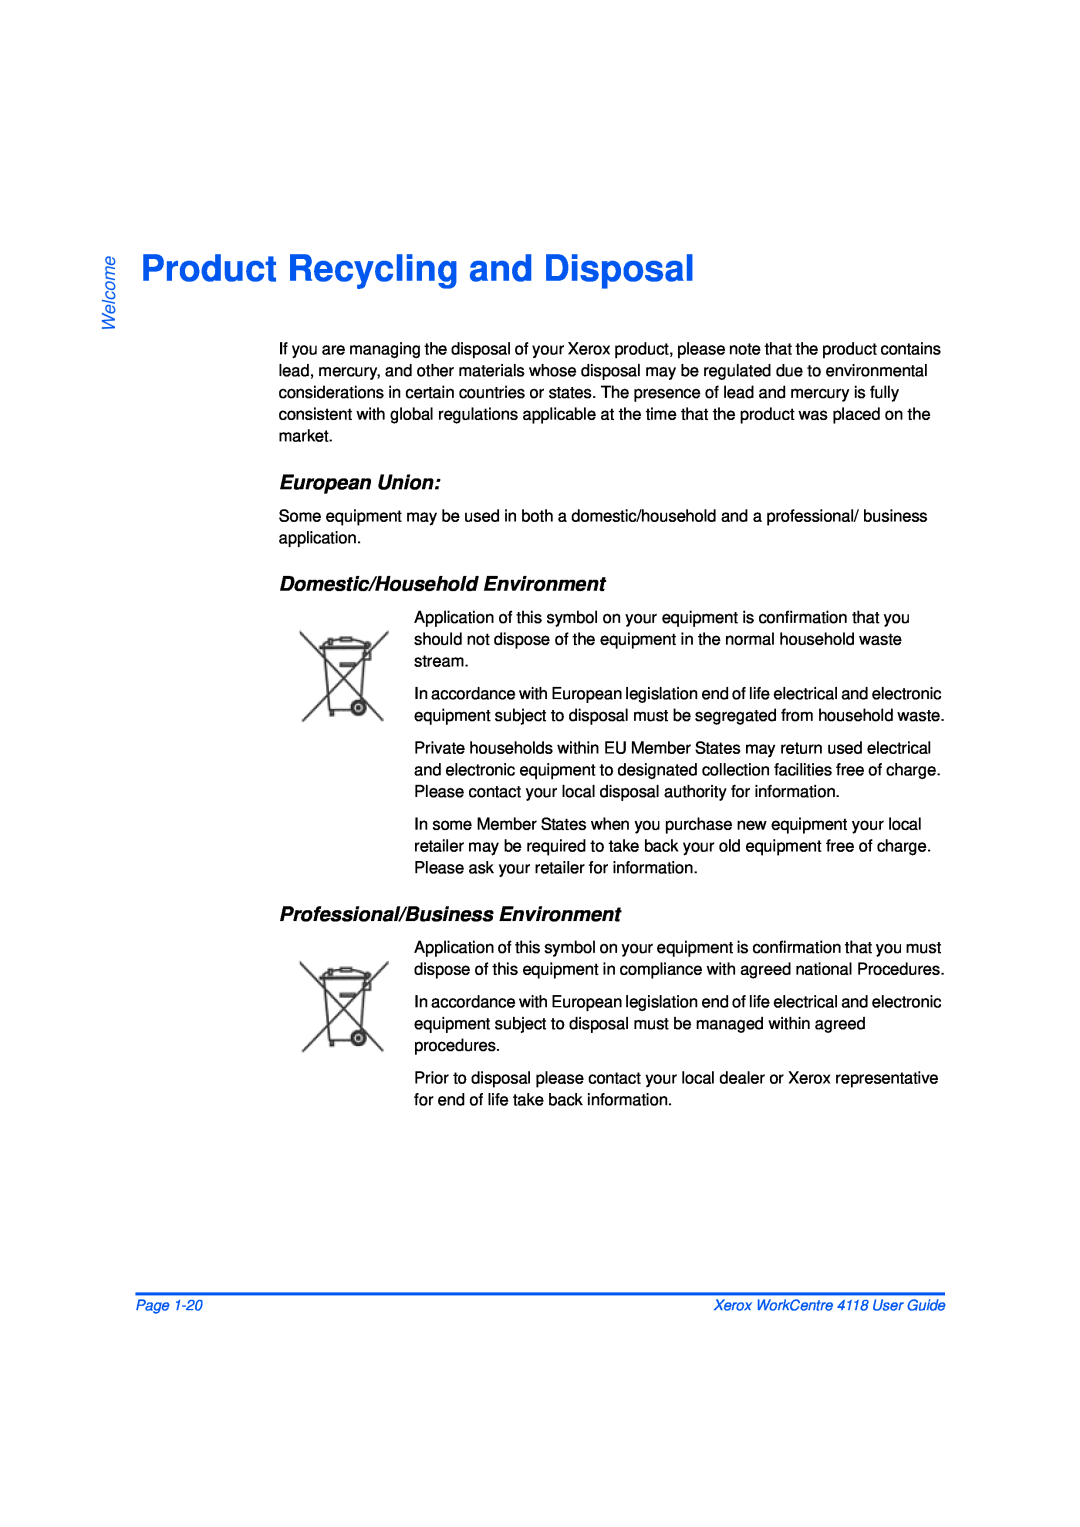 Xerox 32N00467 manual Product Recycling and Disposal, European Union, Domestic/Household Environment, Welcome 